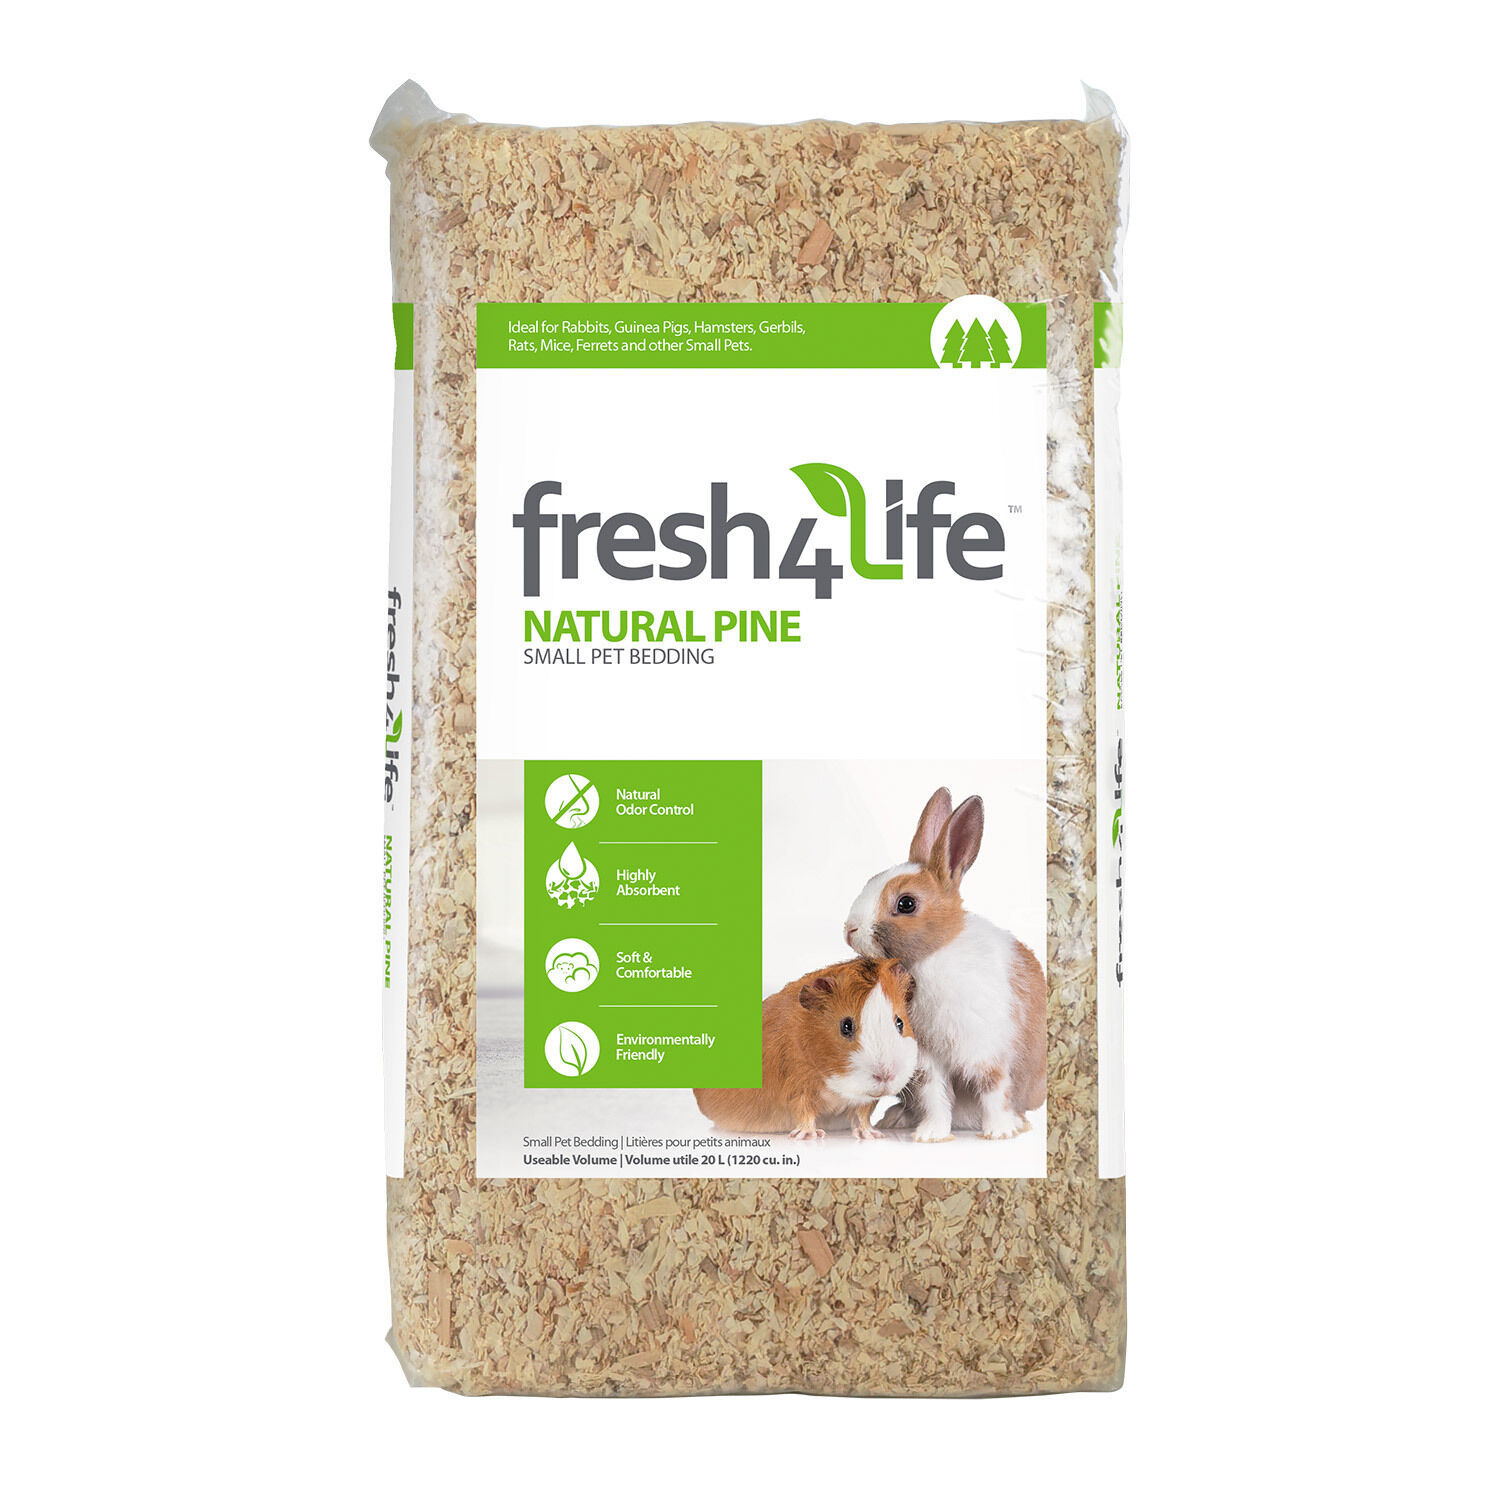 25% Off All Fresh 4 Life Pine and Aspen Bedding